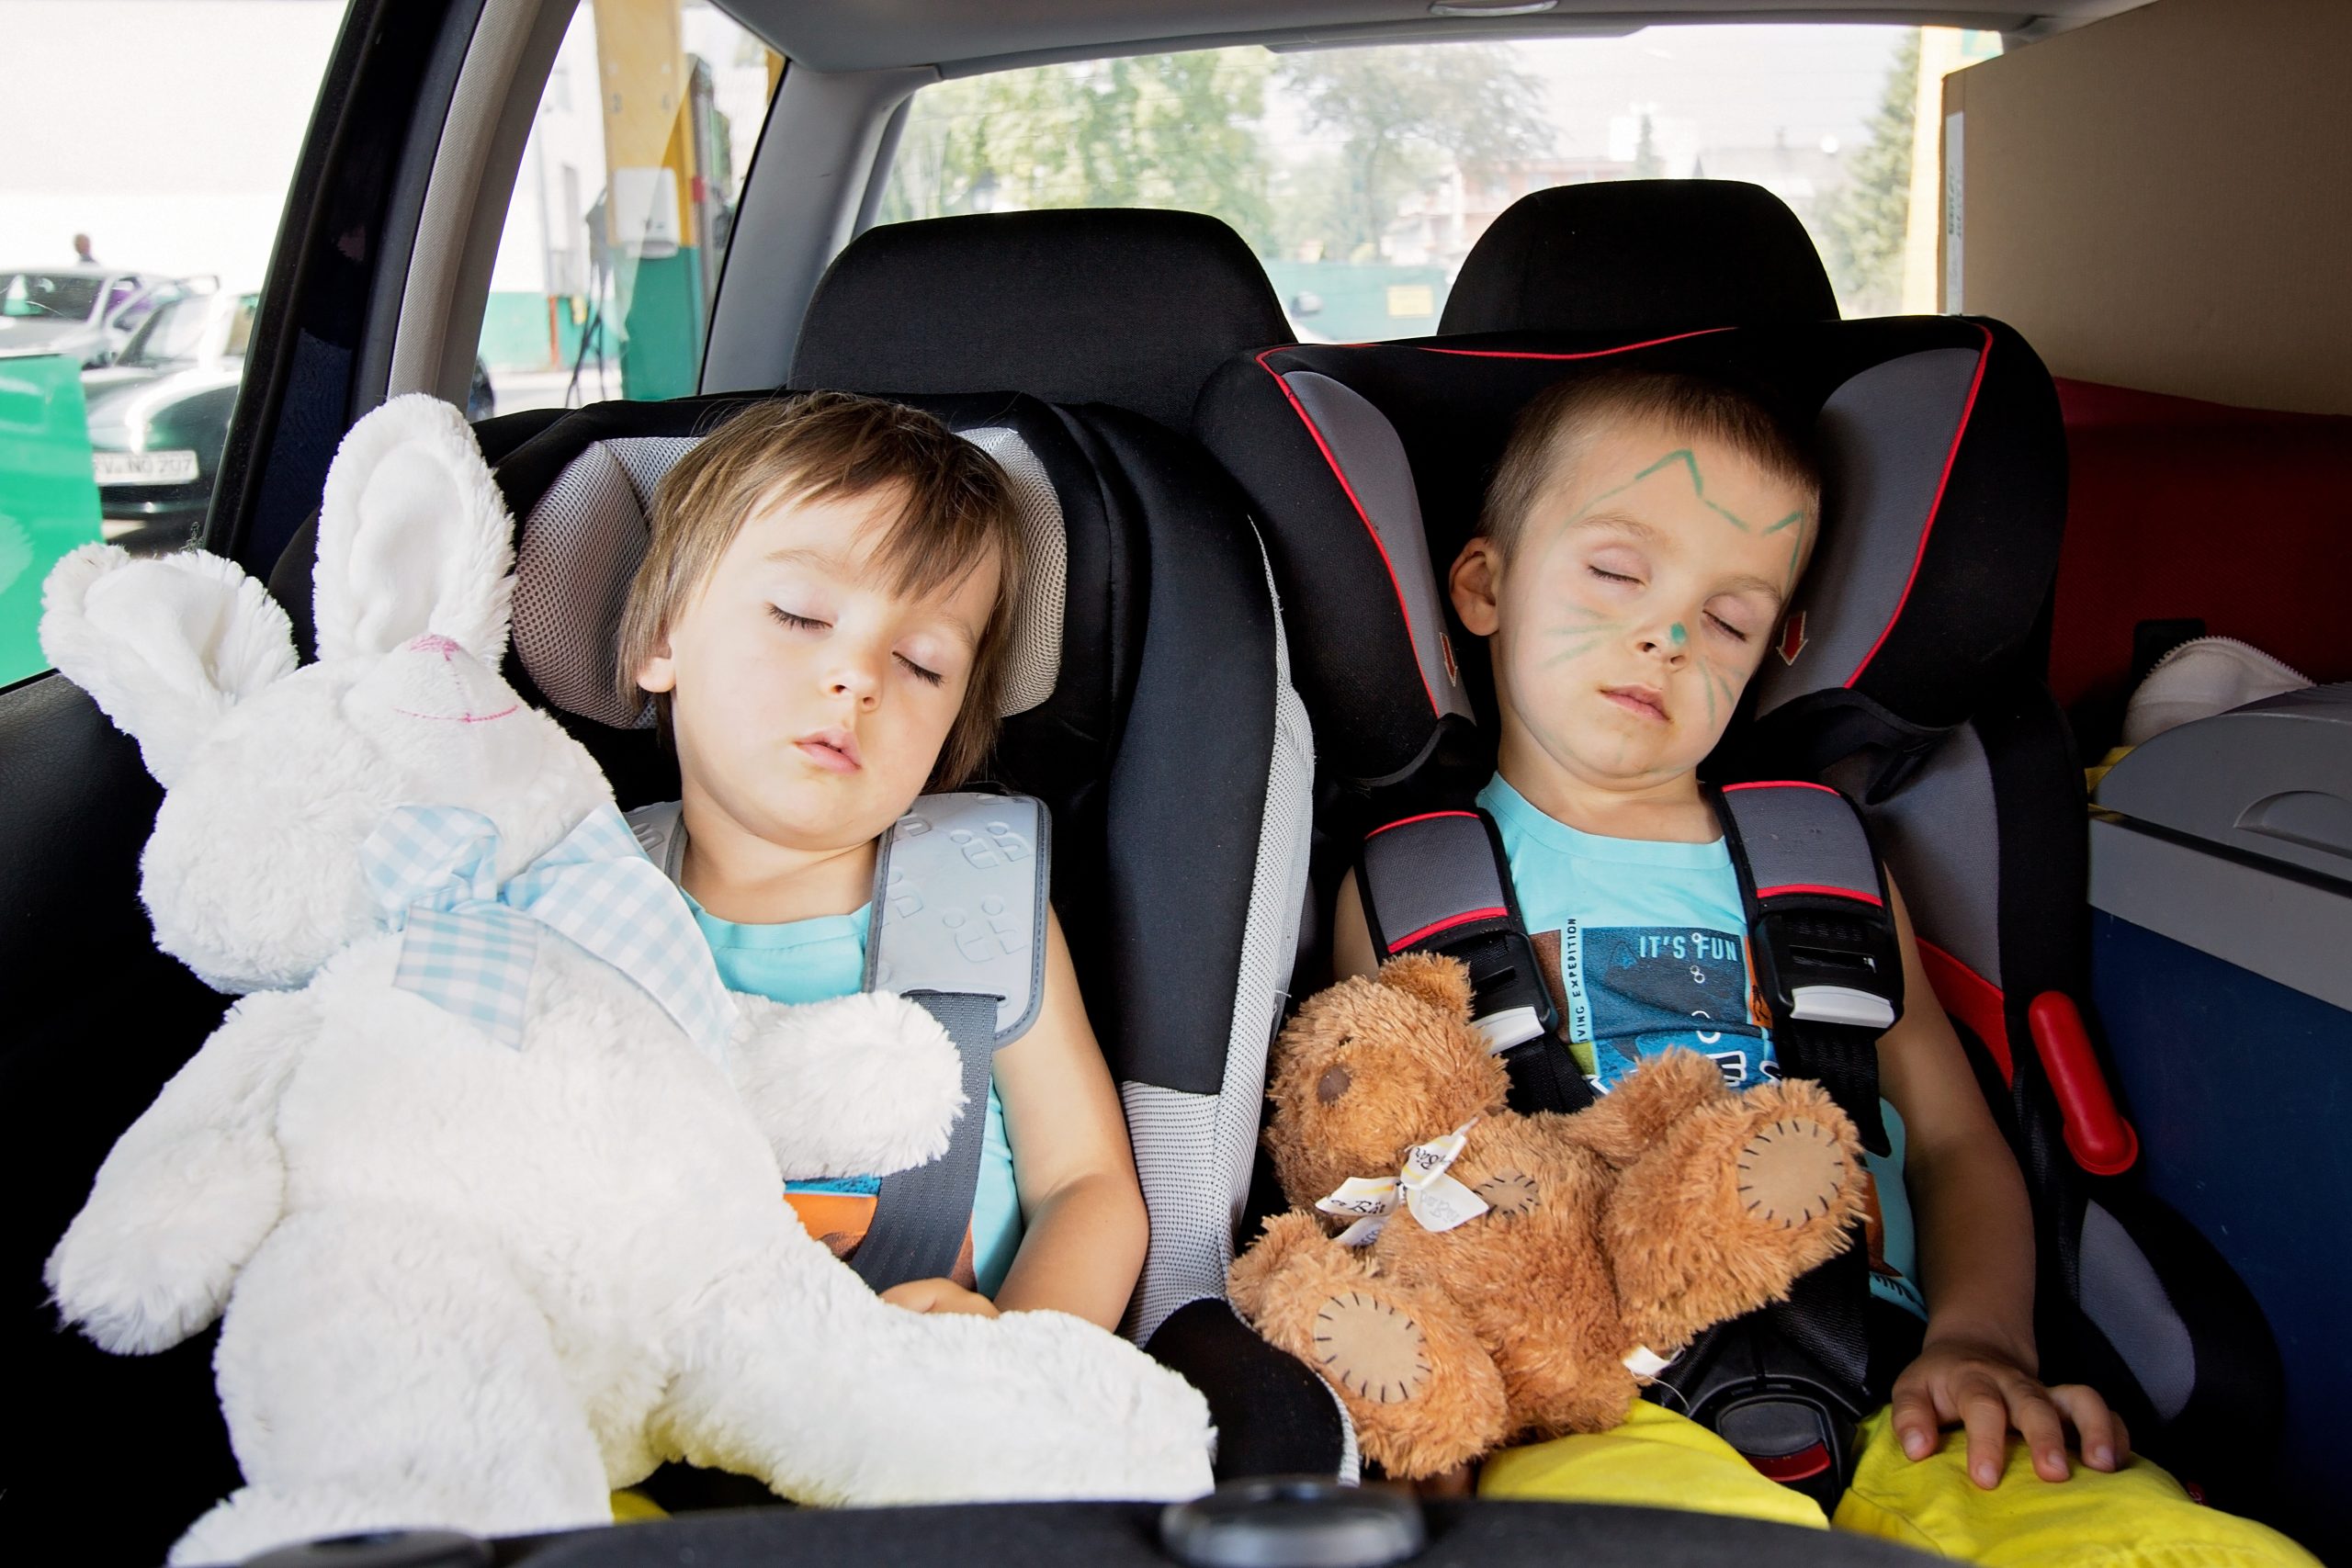 Two kids in car seats, travelling